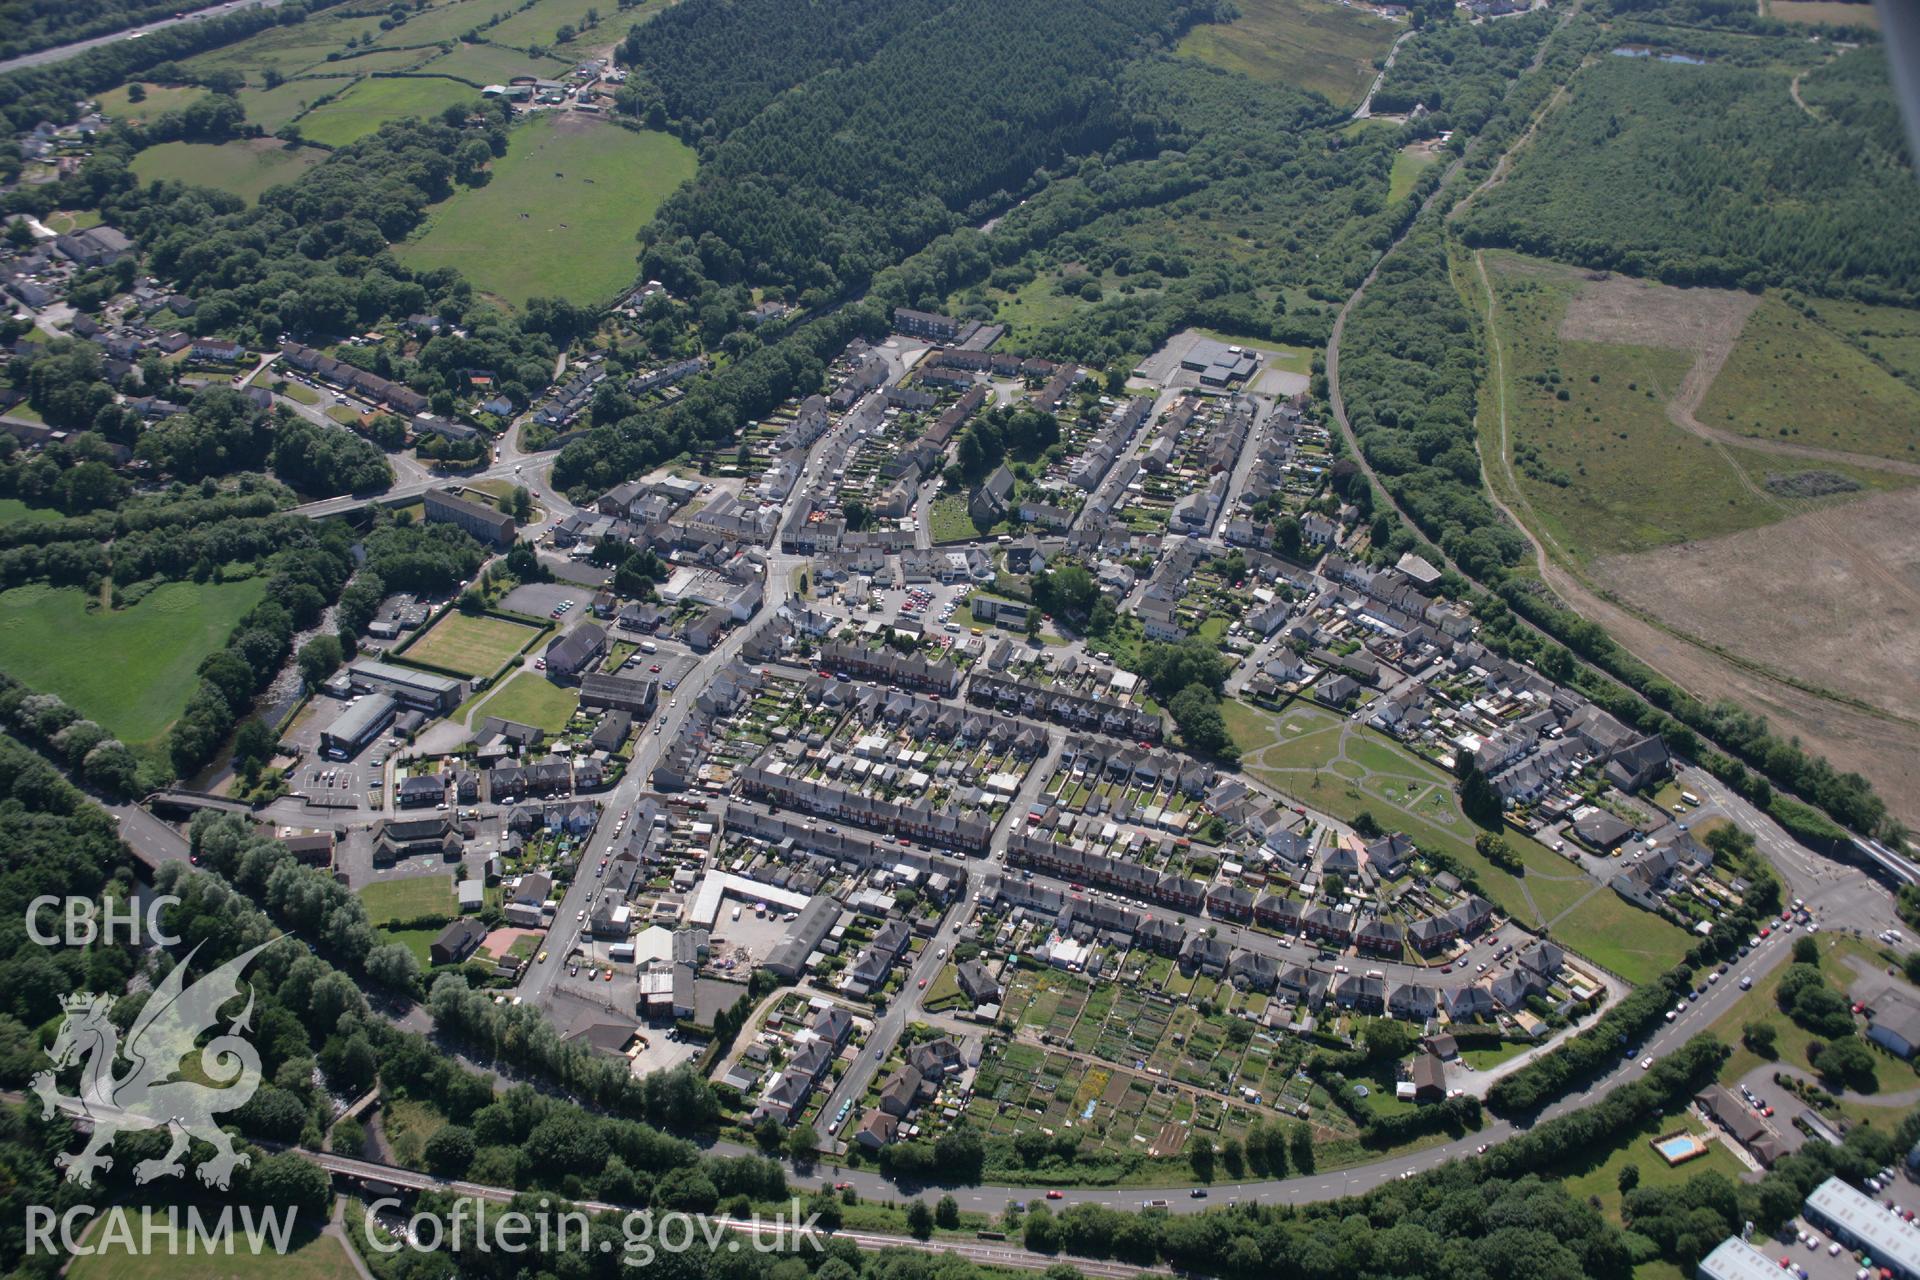 RCAHMW colour oblique aerial photograph showing landscape view of AberKenfig. Taken on 24 July 2006 by Toby Driver.